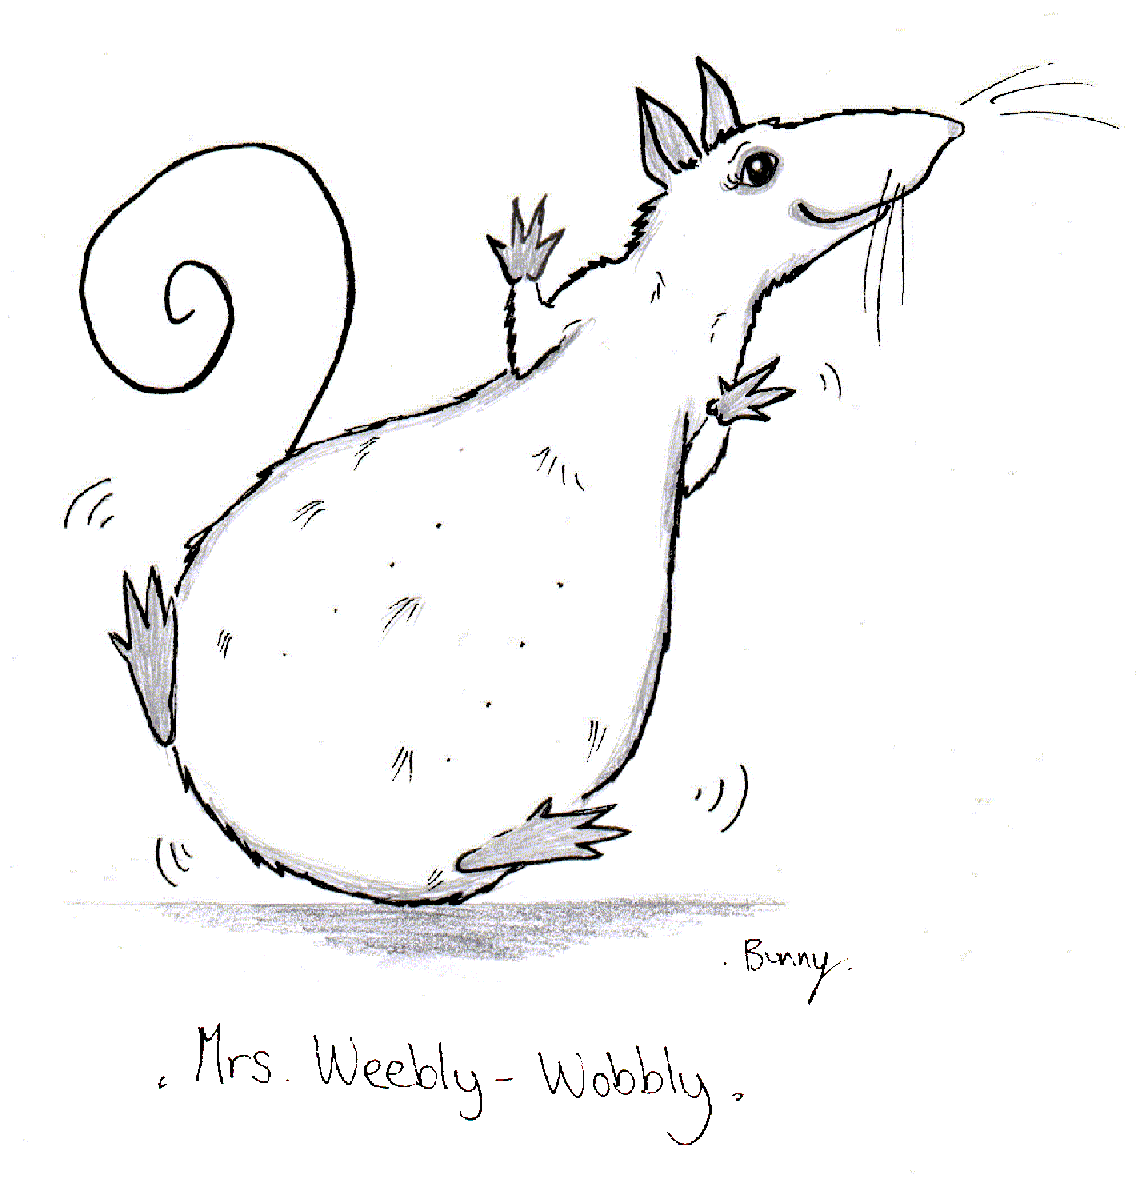 Mrs Weebly-Wobbly:- greyscale cartoon of fat-bottomed female rat standing up with hands pressed against the other side of a pane of glass, teetering like one of those round-bottomed, weighted toys that can't be knocked over